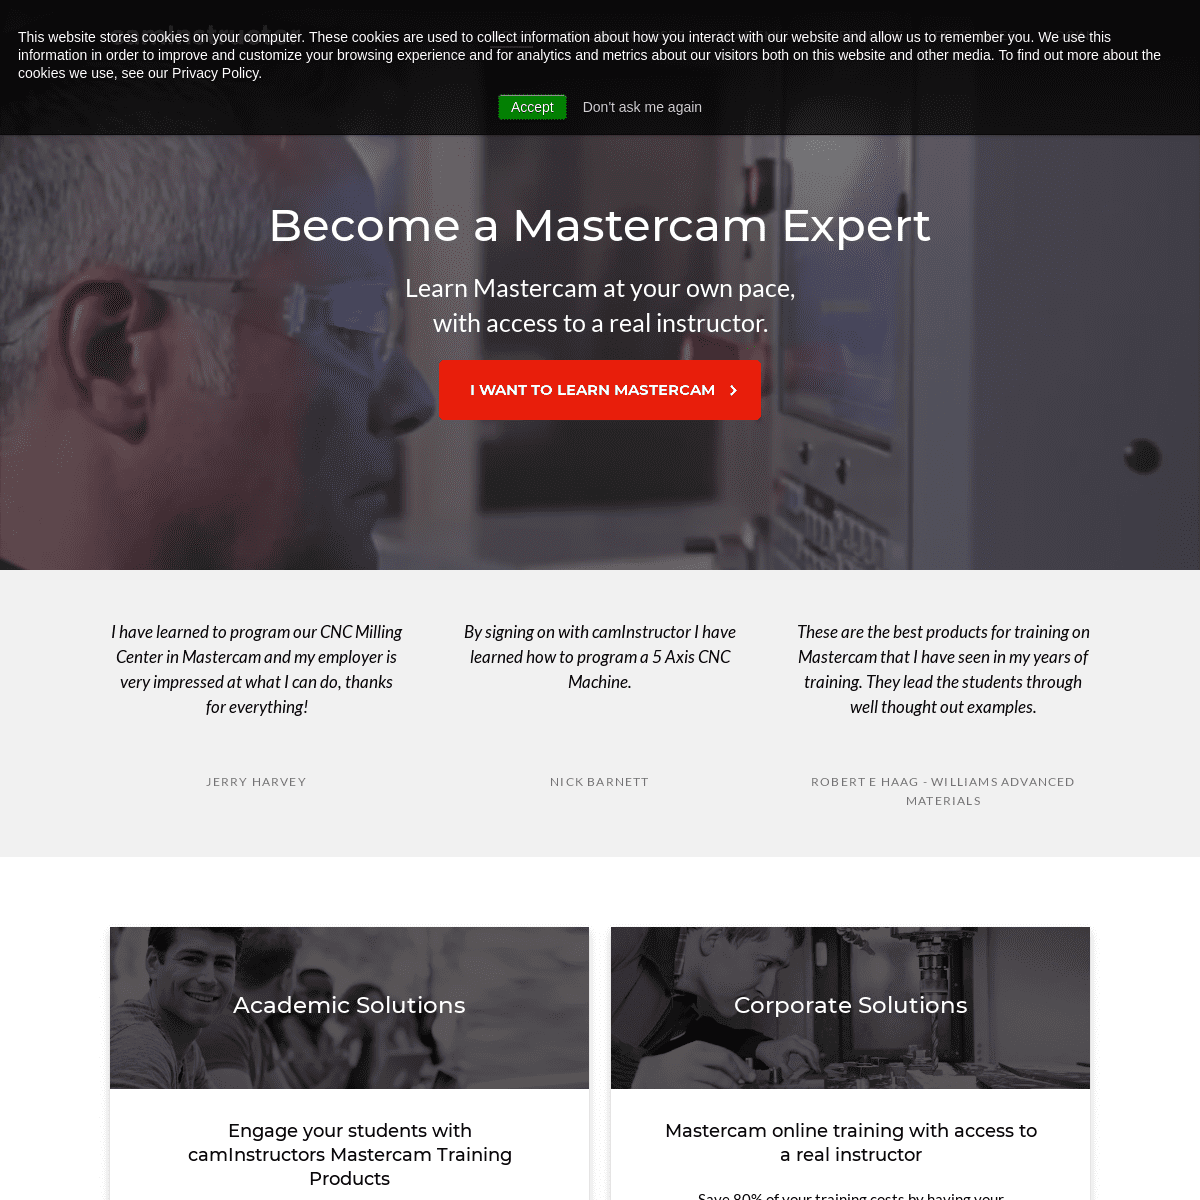 Mastercam Training - Online Courses and Books - CamInstructor